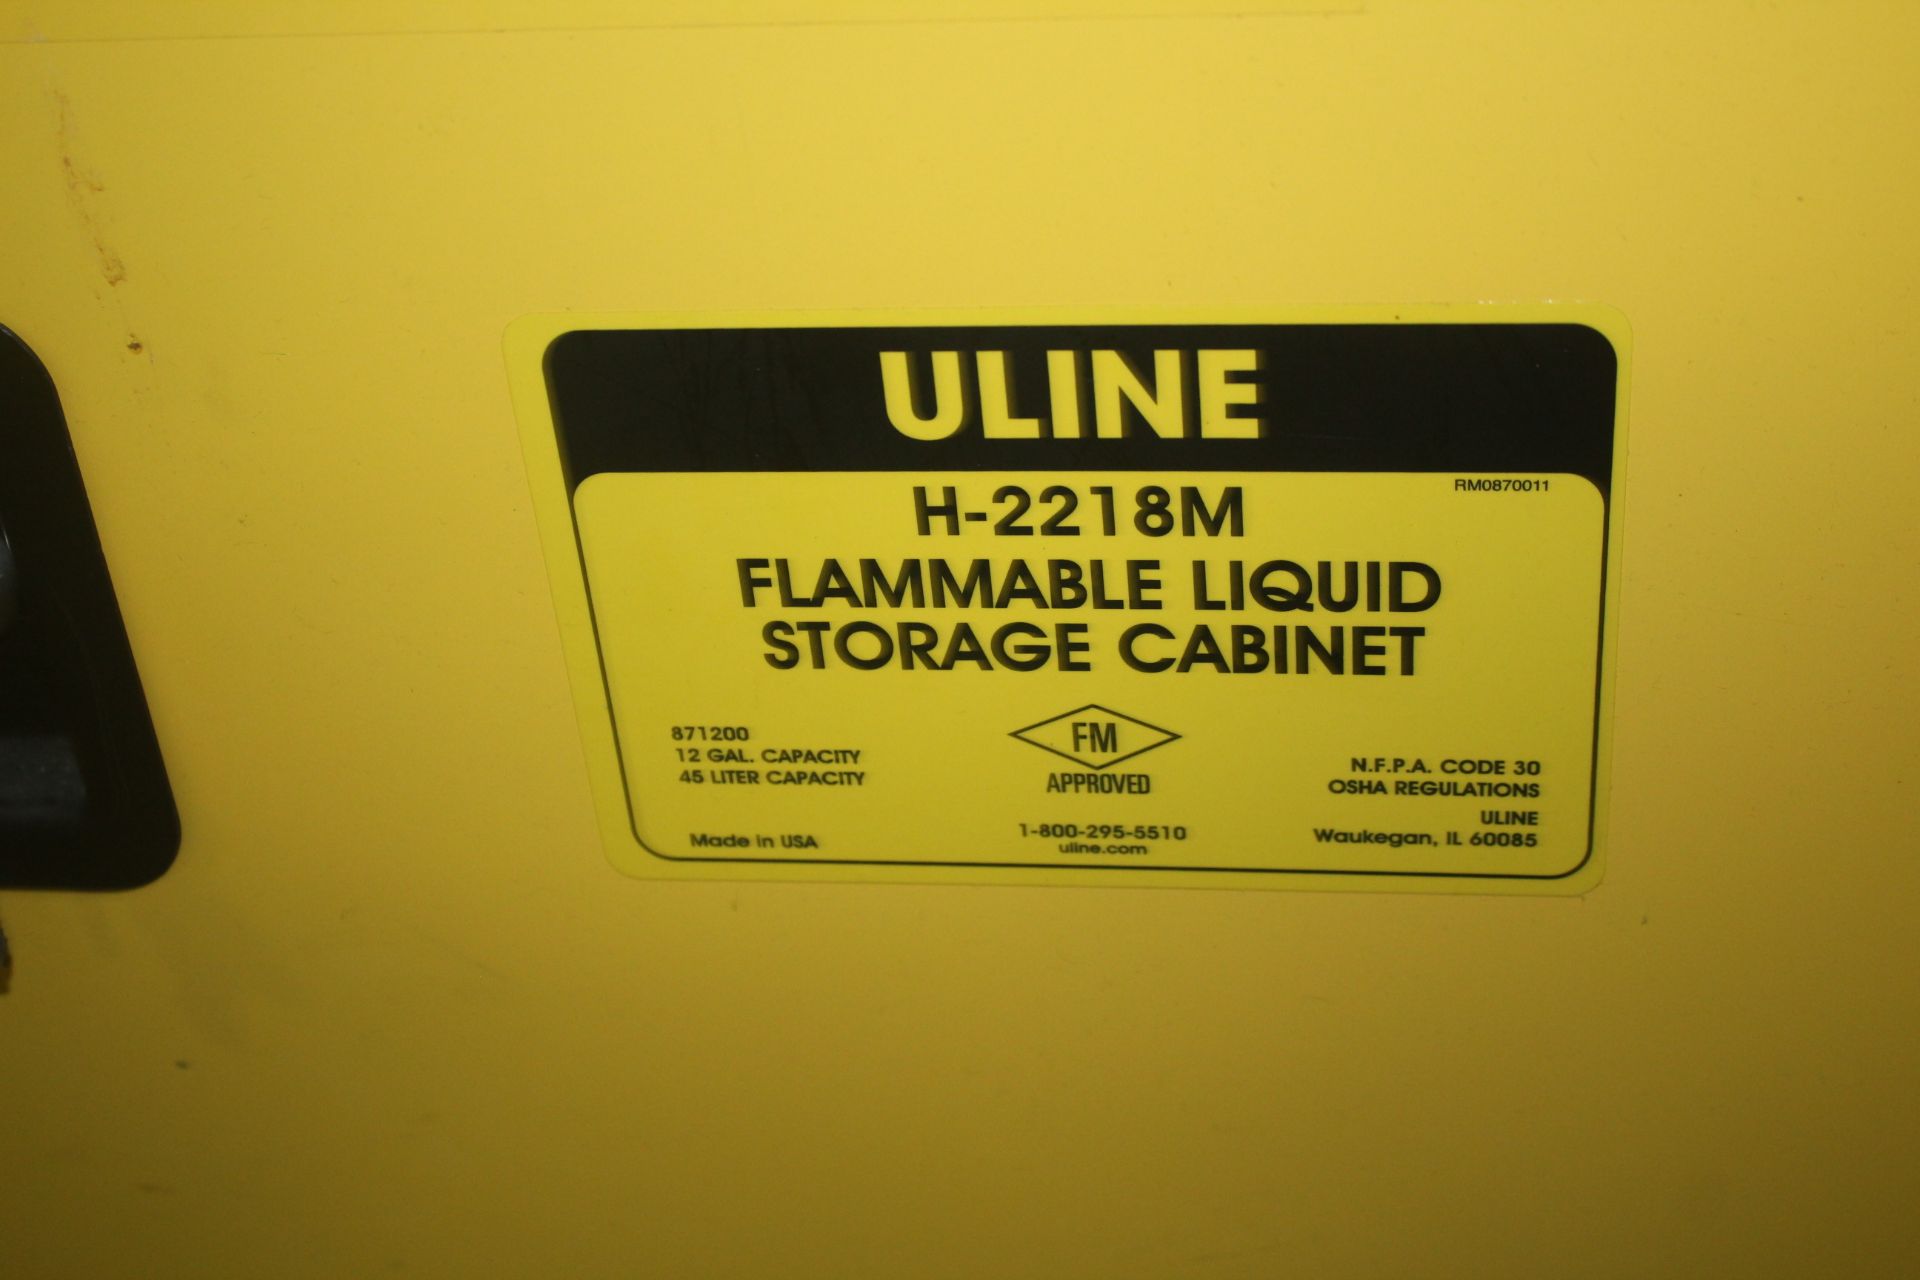 ULINE FLAMMABLE LIQUID STORAGE CABINET, 23" X 18" X 35" WITH CONTENTS (AEROSOLS, CLEANERS, ETC.) - Image 2 of 3